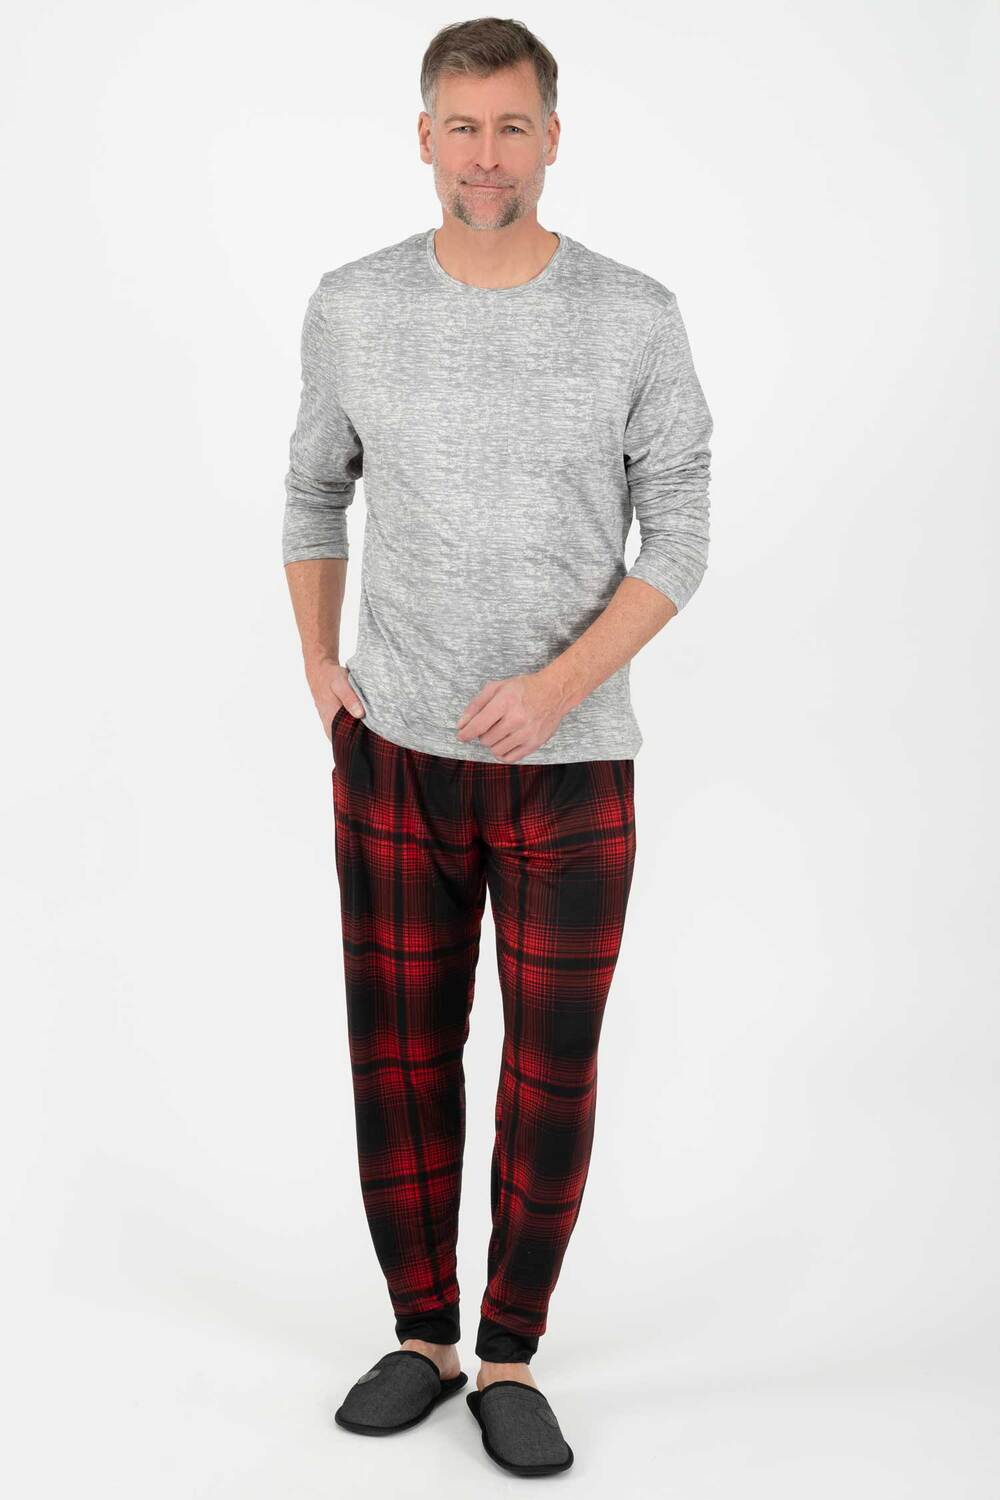 Men's long-sleeve, "Cool Touch" PJ set - Red plaid